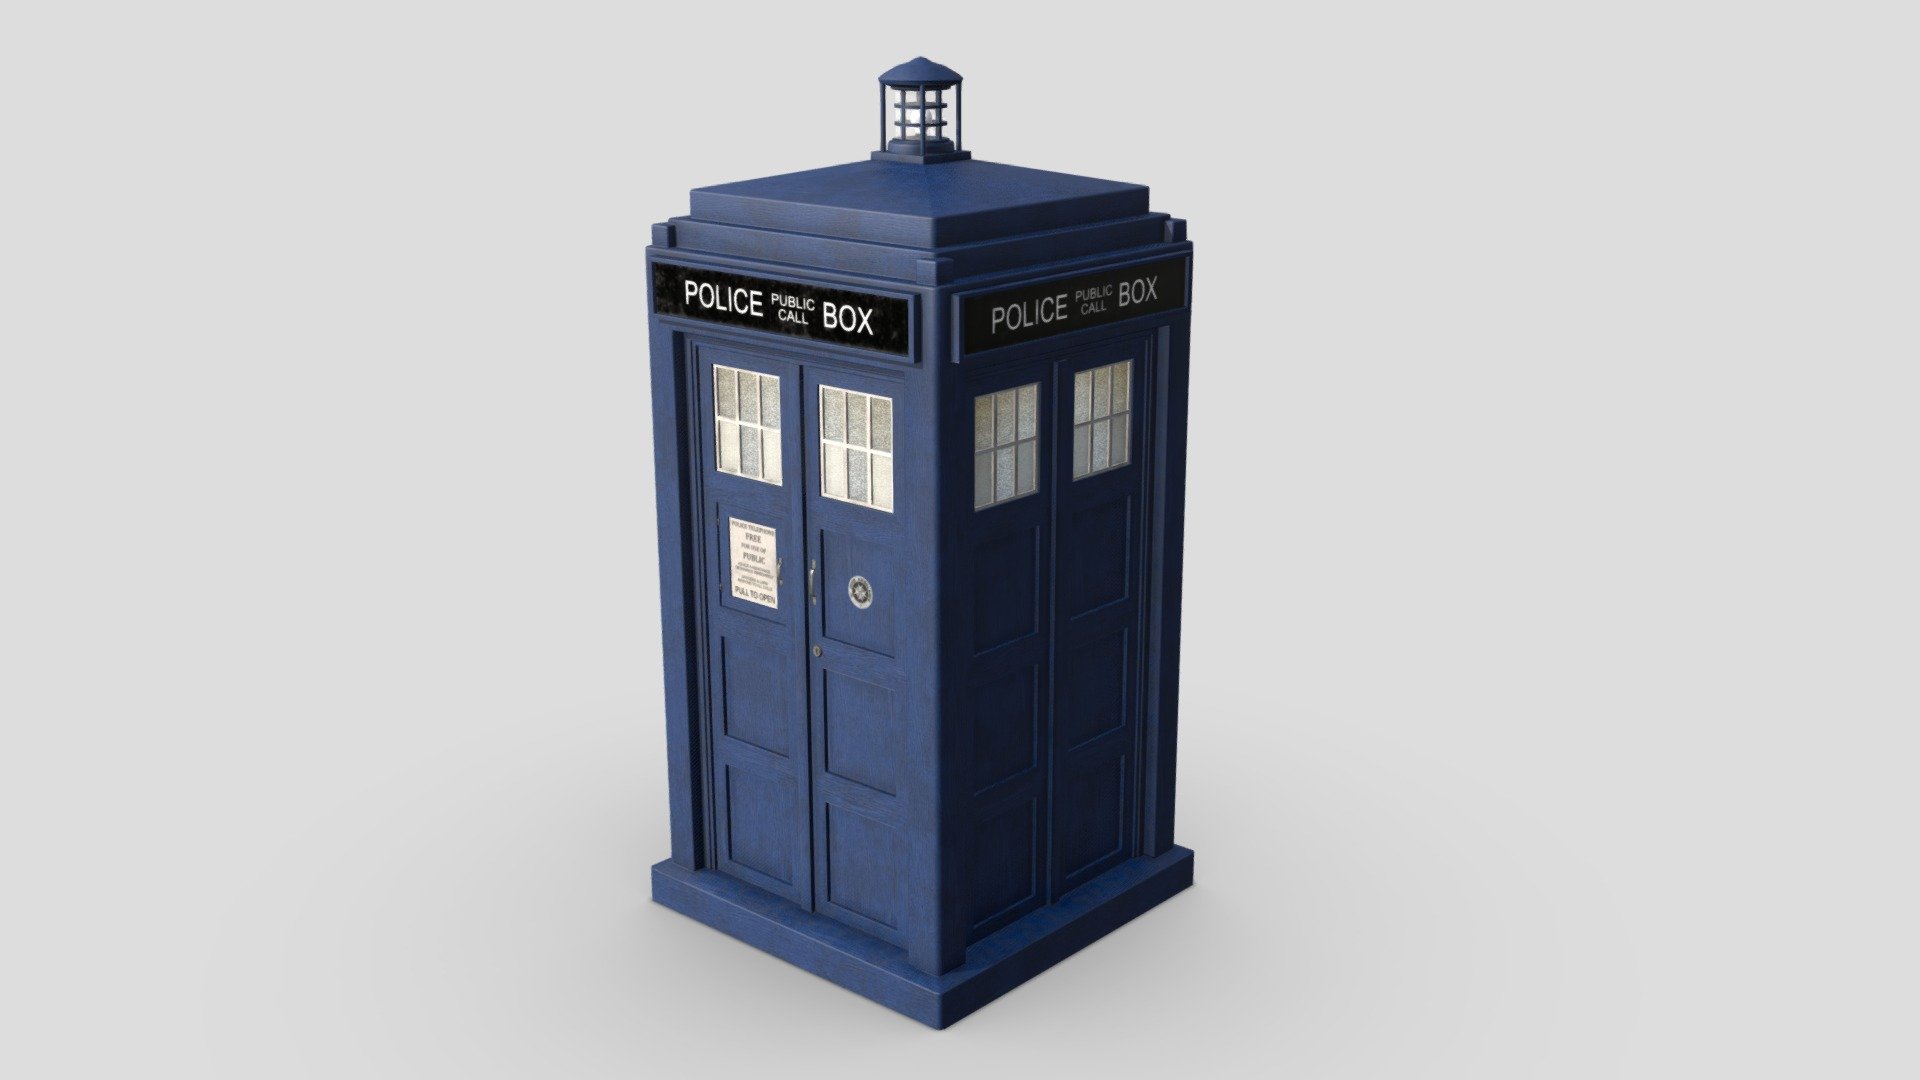 A high-poly model of the last TARDIS from Doctor Who. Modelled in Blender and textured using Quixel Mixer. All materials have been baked into albedo/roughness/metallic/oppacity/emission maps. The texture resolution is 4k. The Blender model includes a non lit-up as well as a lit-up version of the TARDIS. A sonic screwdriver is not included.

Doctor Who is a registered trademark of BBC television 3d model